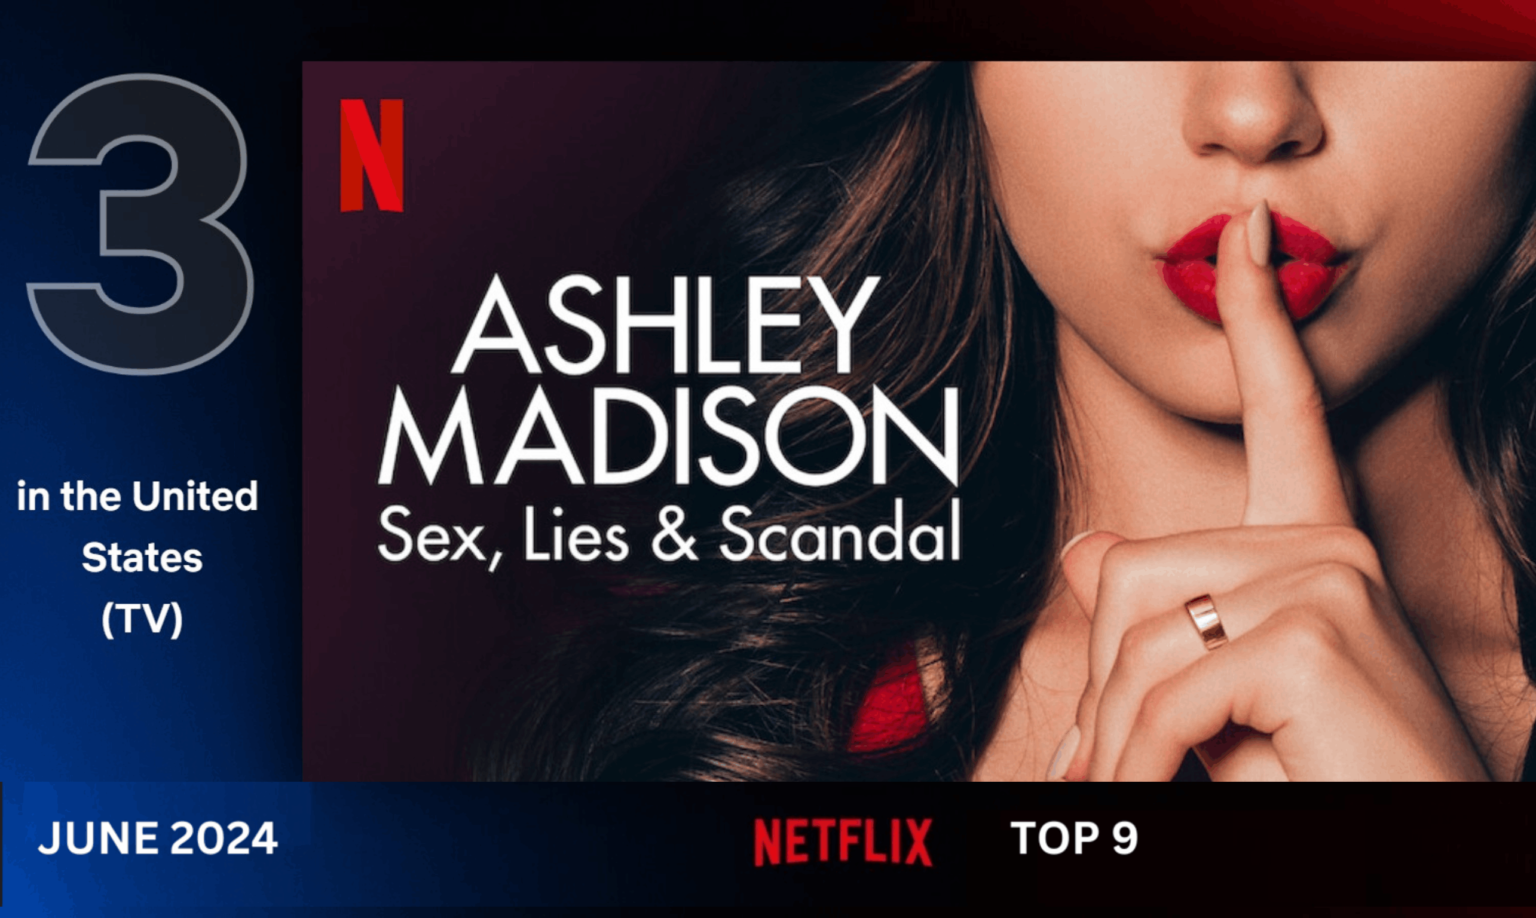 Top-9-Most-Popular-TV-Shows-on-Netflix-in-United-State-Thumbnail-Image-Cherry-streamers-5